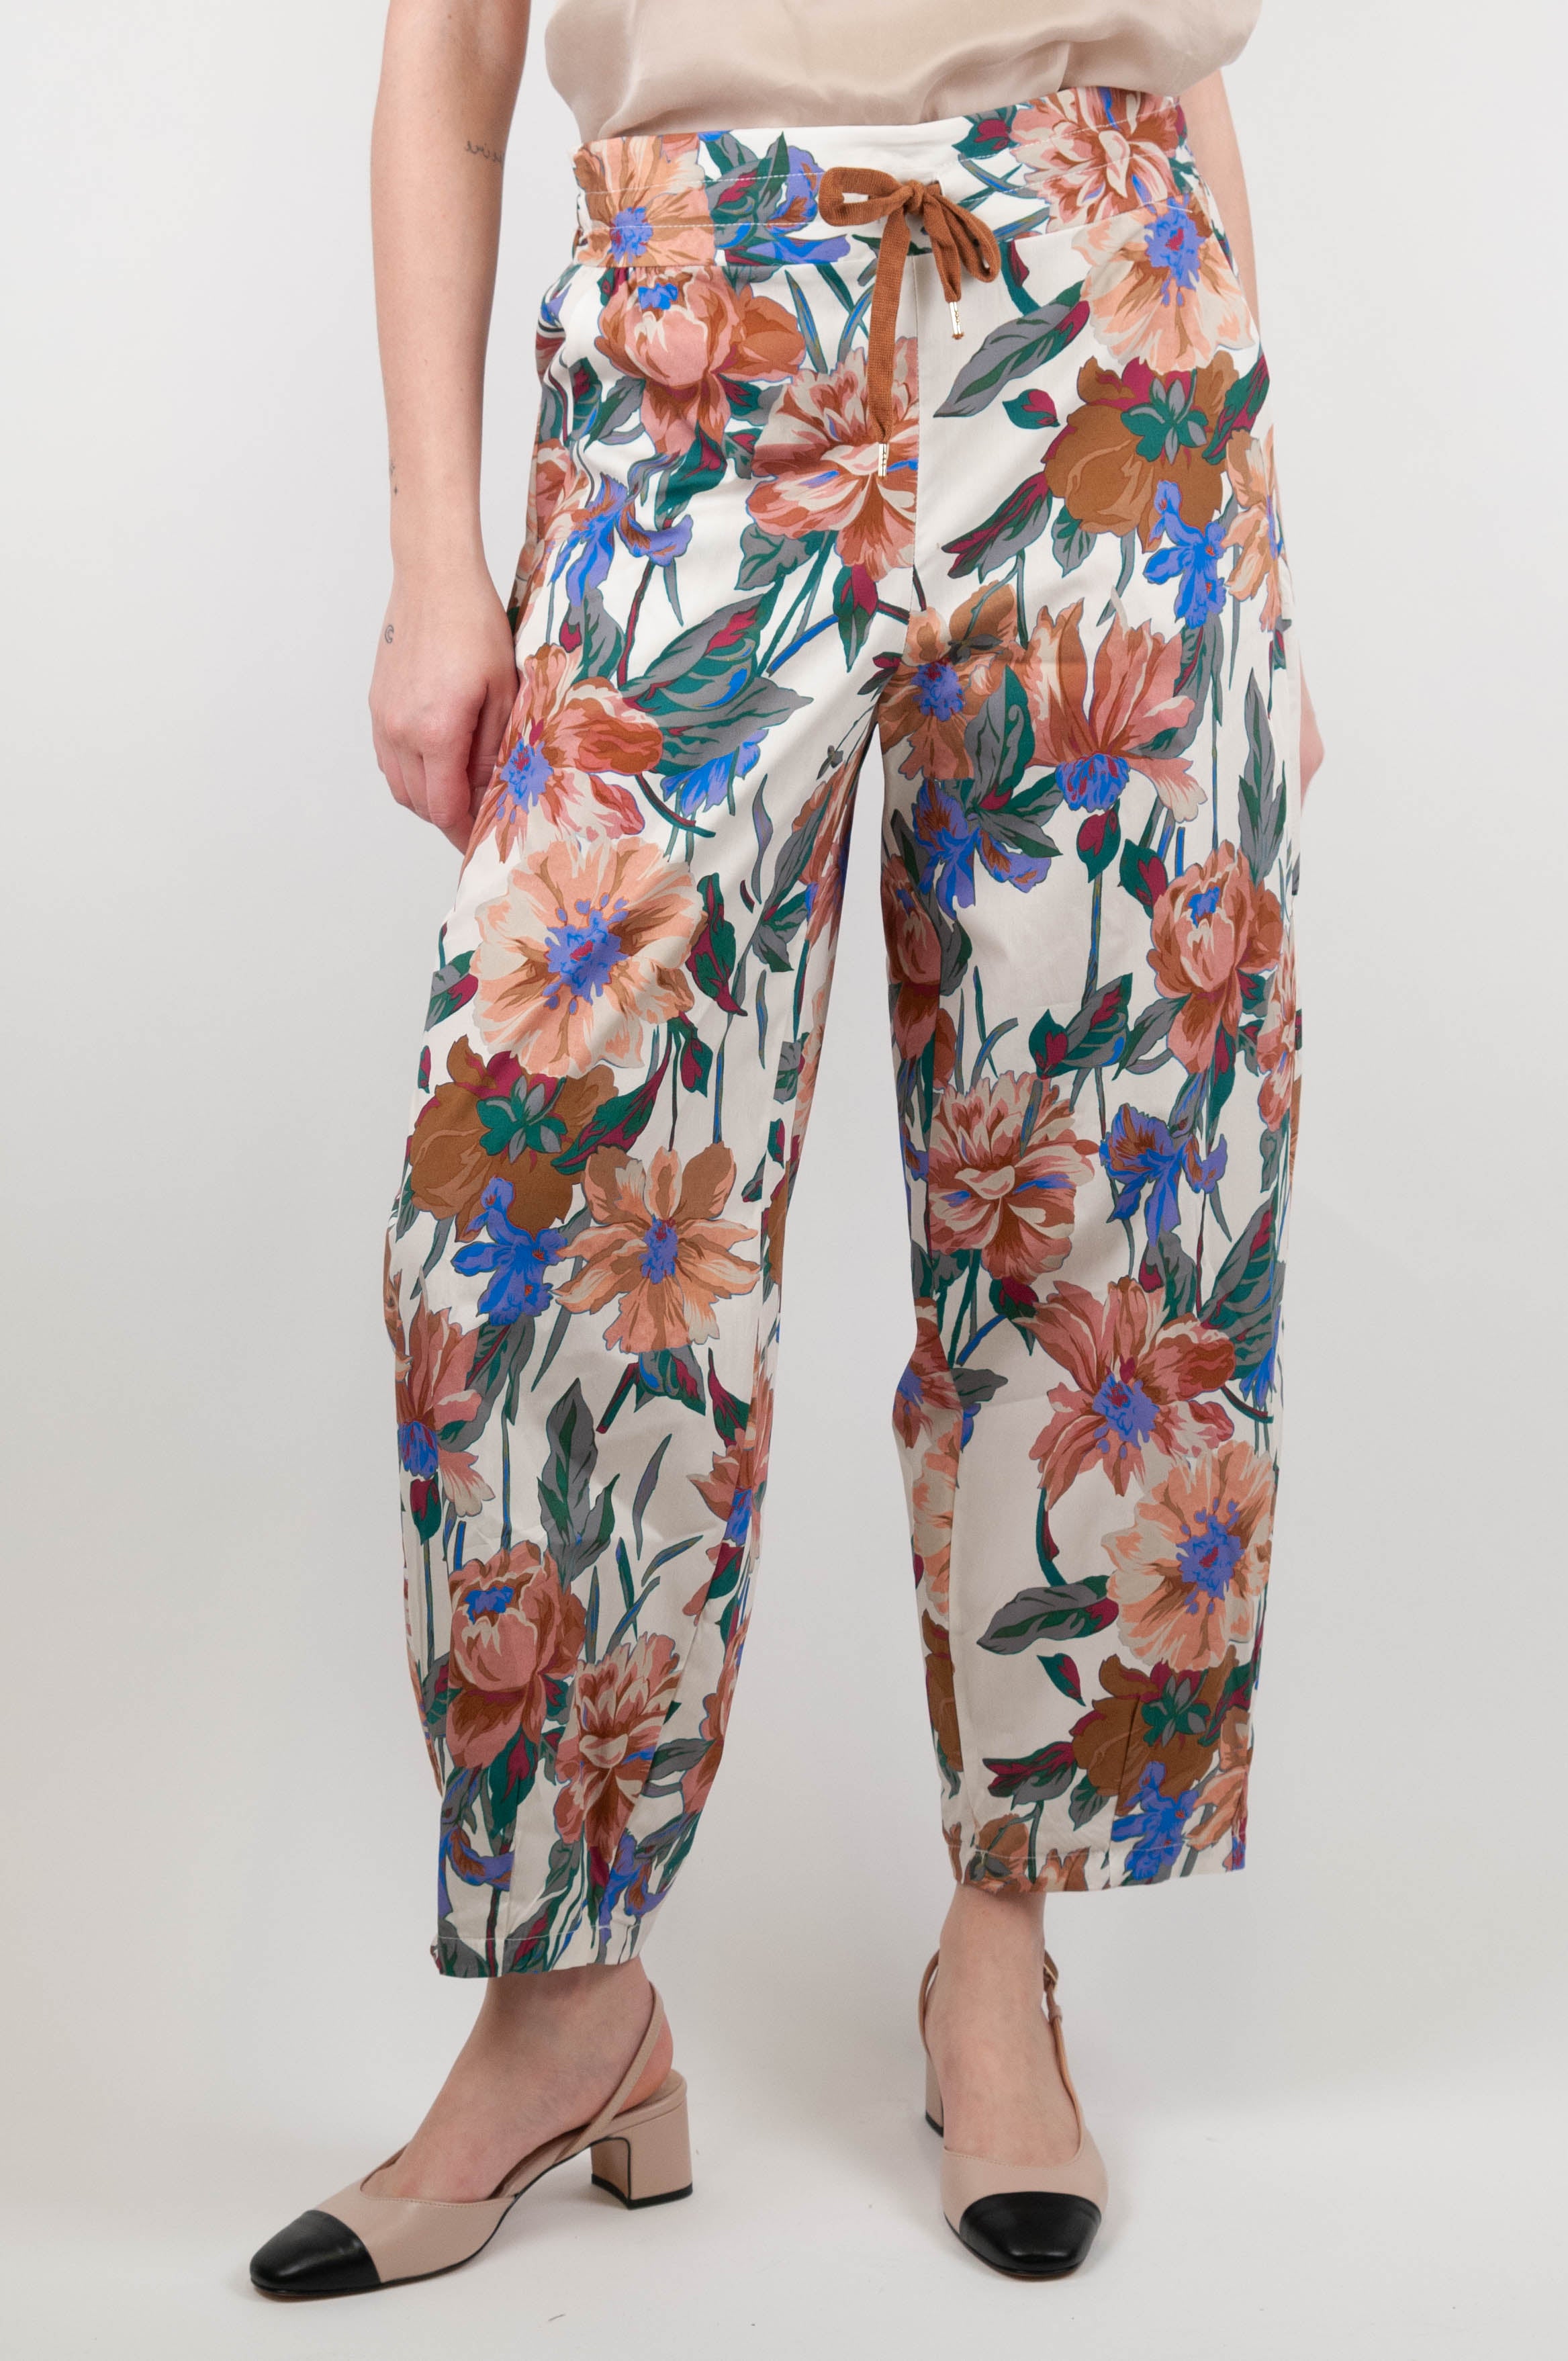 Motel - Trousers with floral patterned drawstring